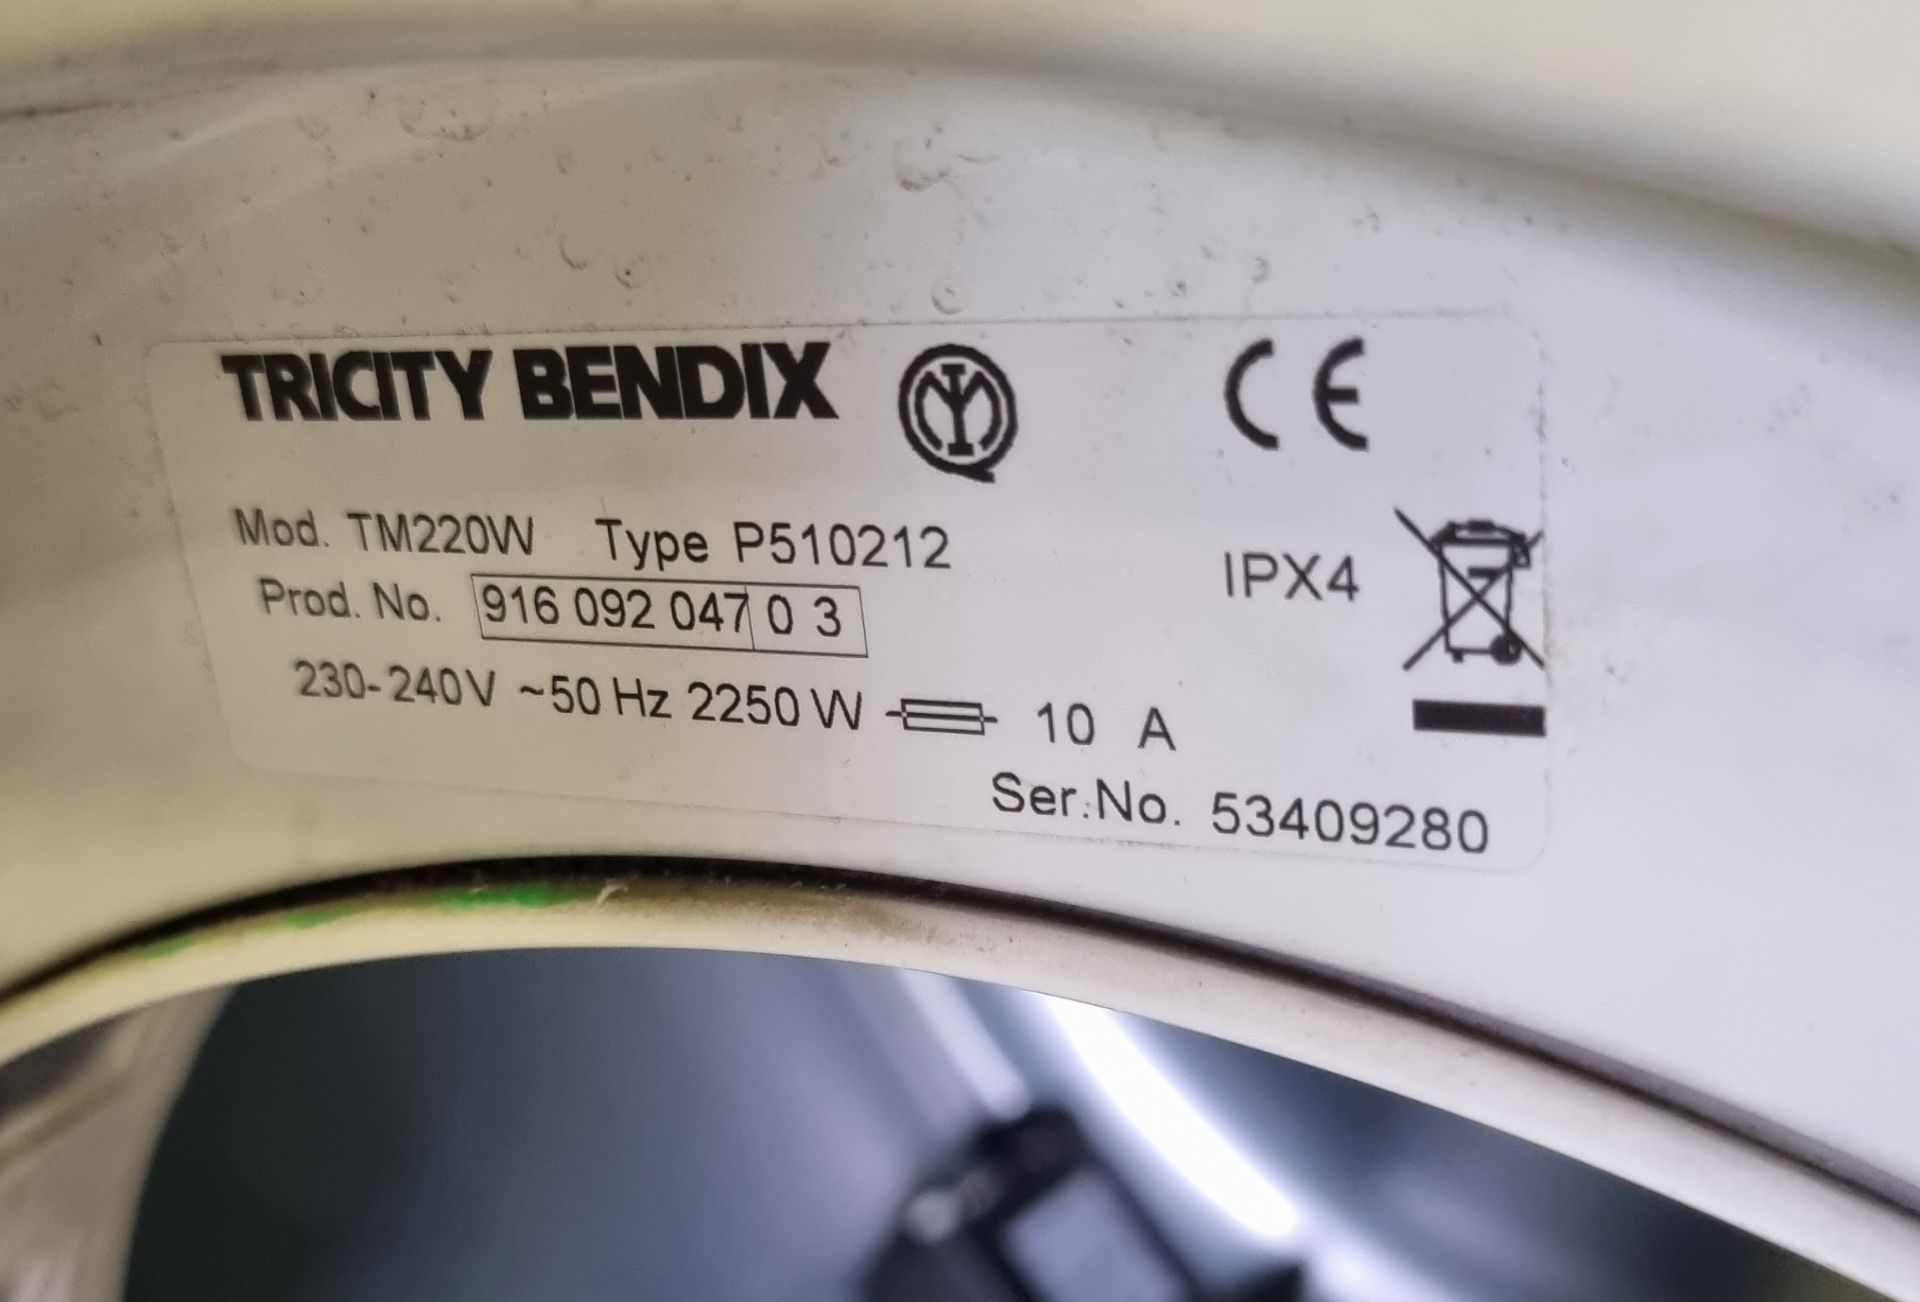 Tricity Bendix tumble dryer - L 600 x W 600 x H 850mm - SOME COSMETIC DAMAGE AND CRACKS ON TOP - Image 4 of 4